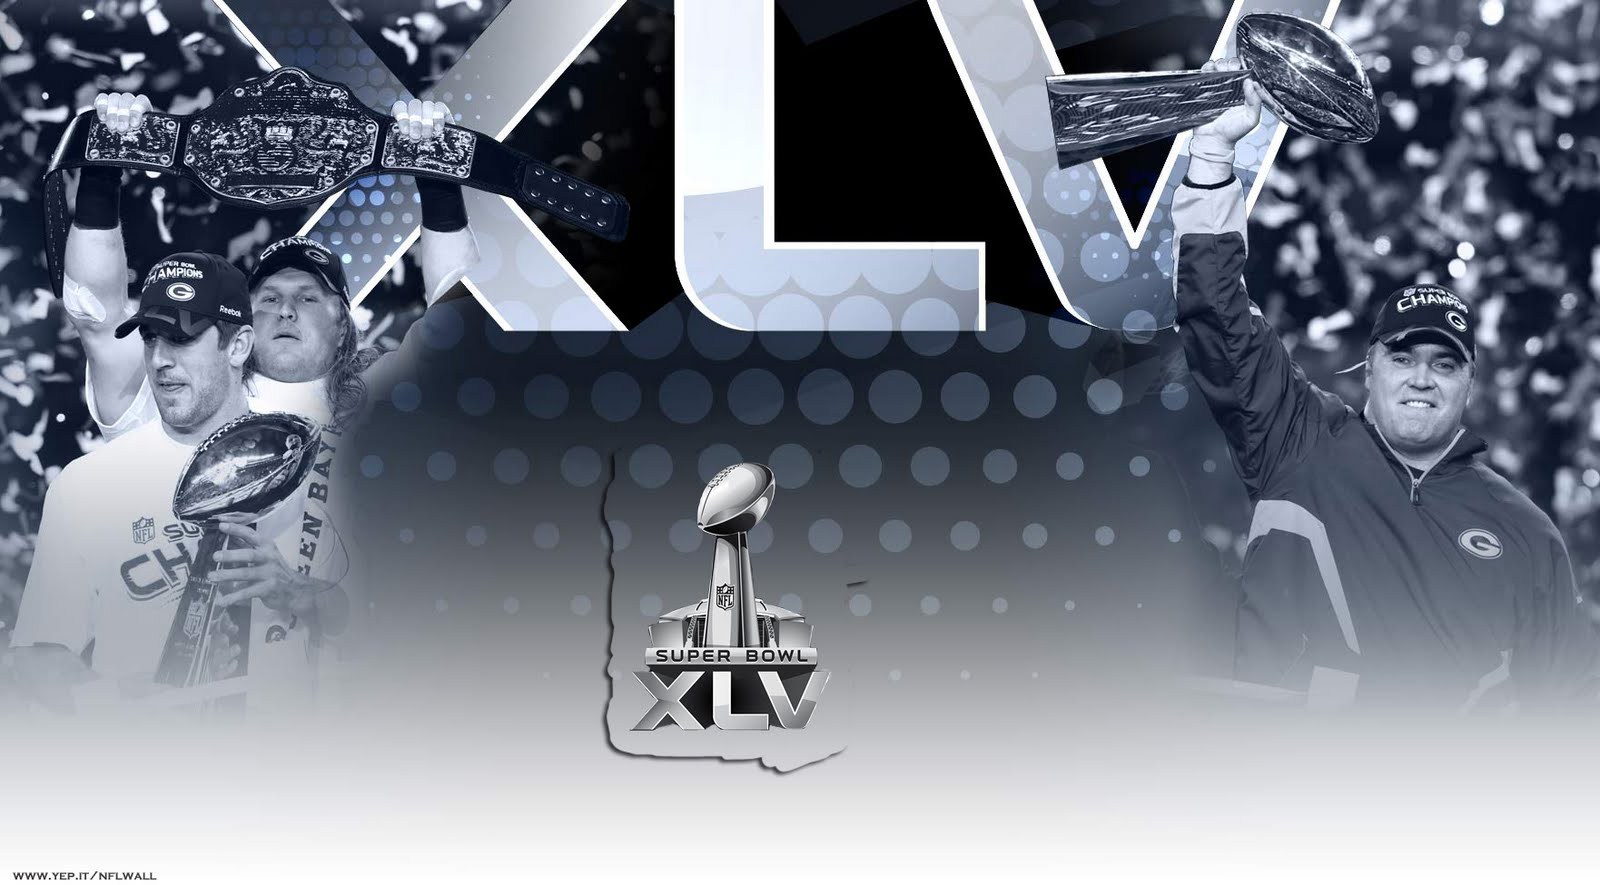 Super Bowl Xlviii Was An American Football Game Between The